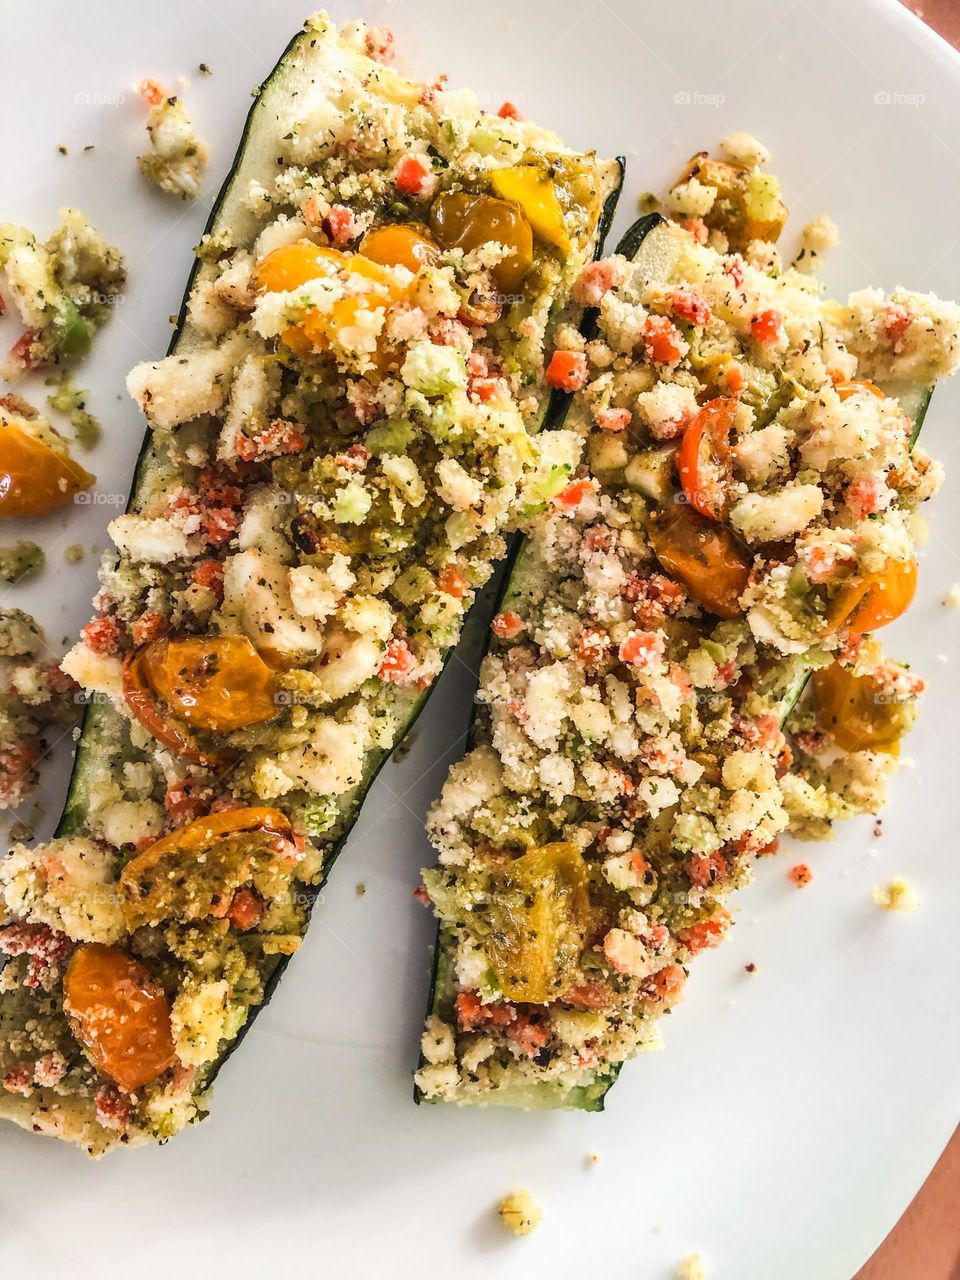 My garden is currently supplying me with an abundance of courgettes, which I enjoy topped with Mediterranean couscous, breadcrumbs and feta